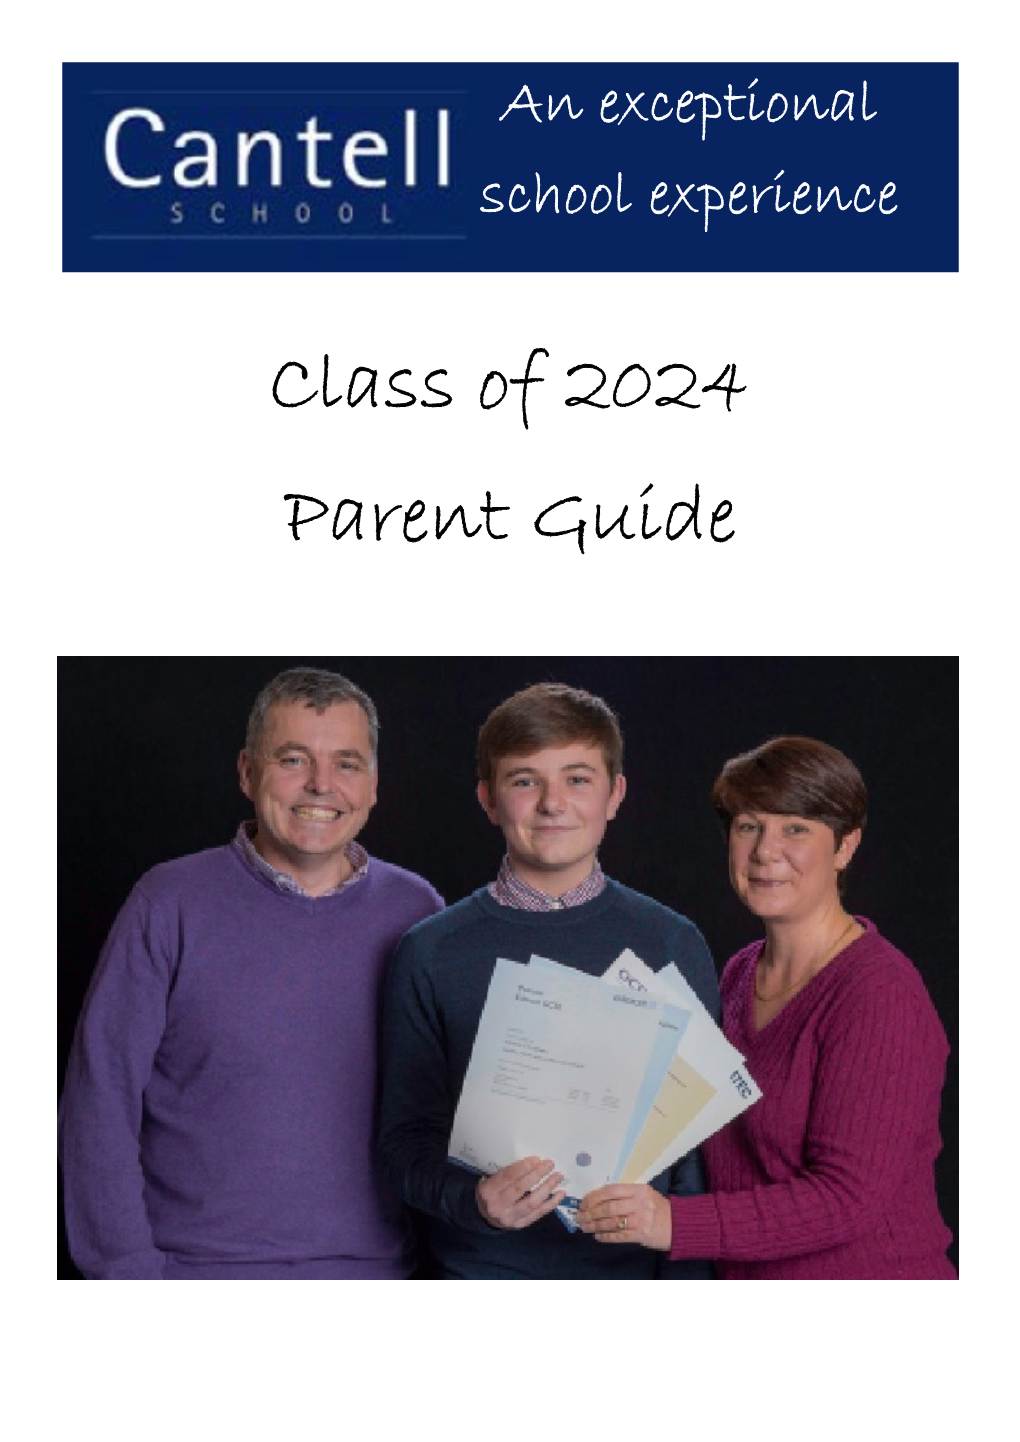 Class of 2024 Parent Guide Welcomefrequently to Askedcantell! Questions